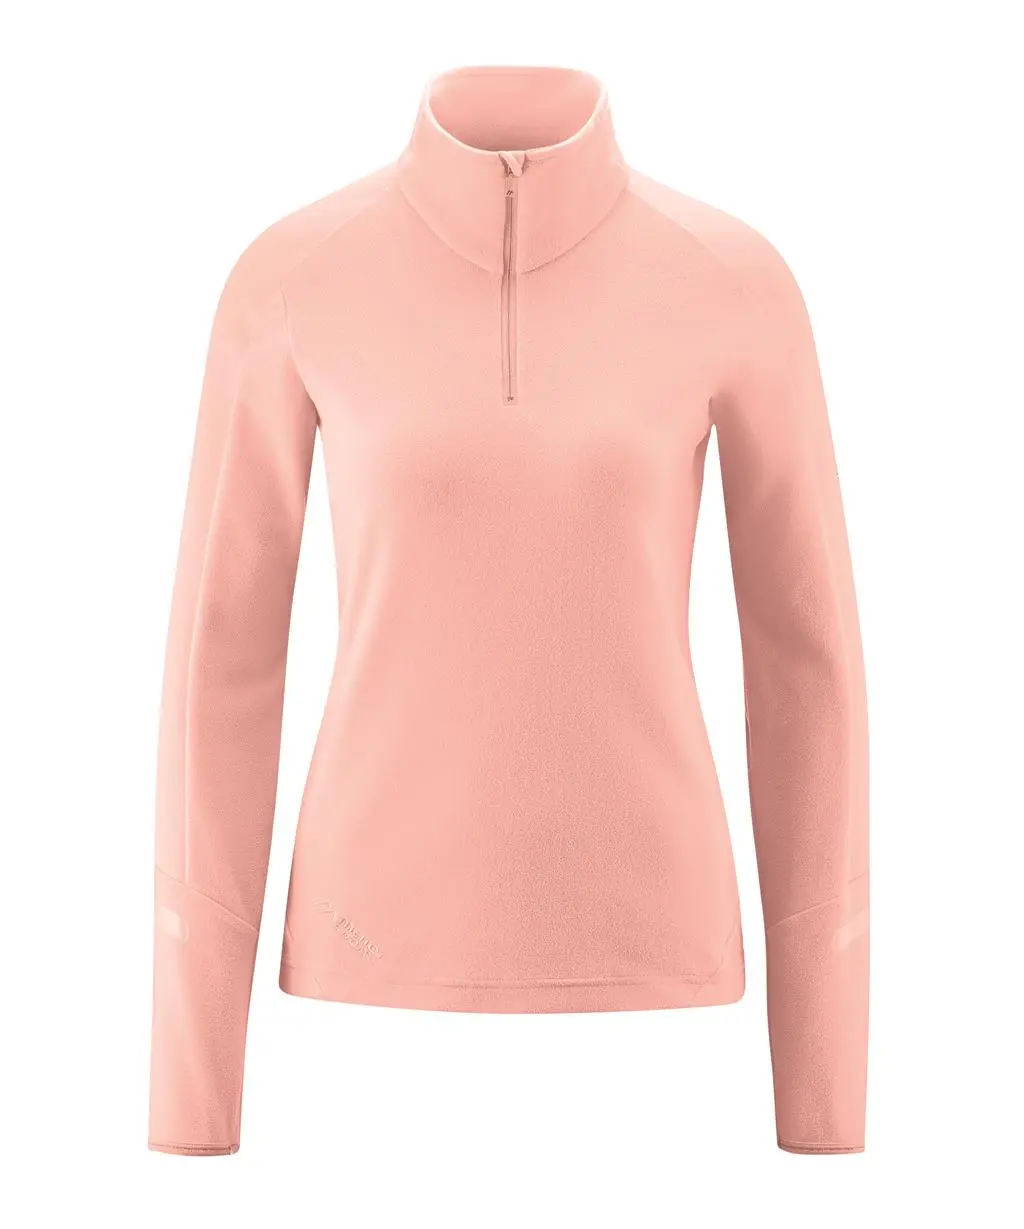 Maier Sports Grote Maten Rose Goldie skipully dames